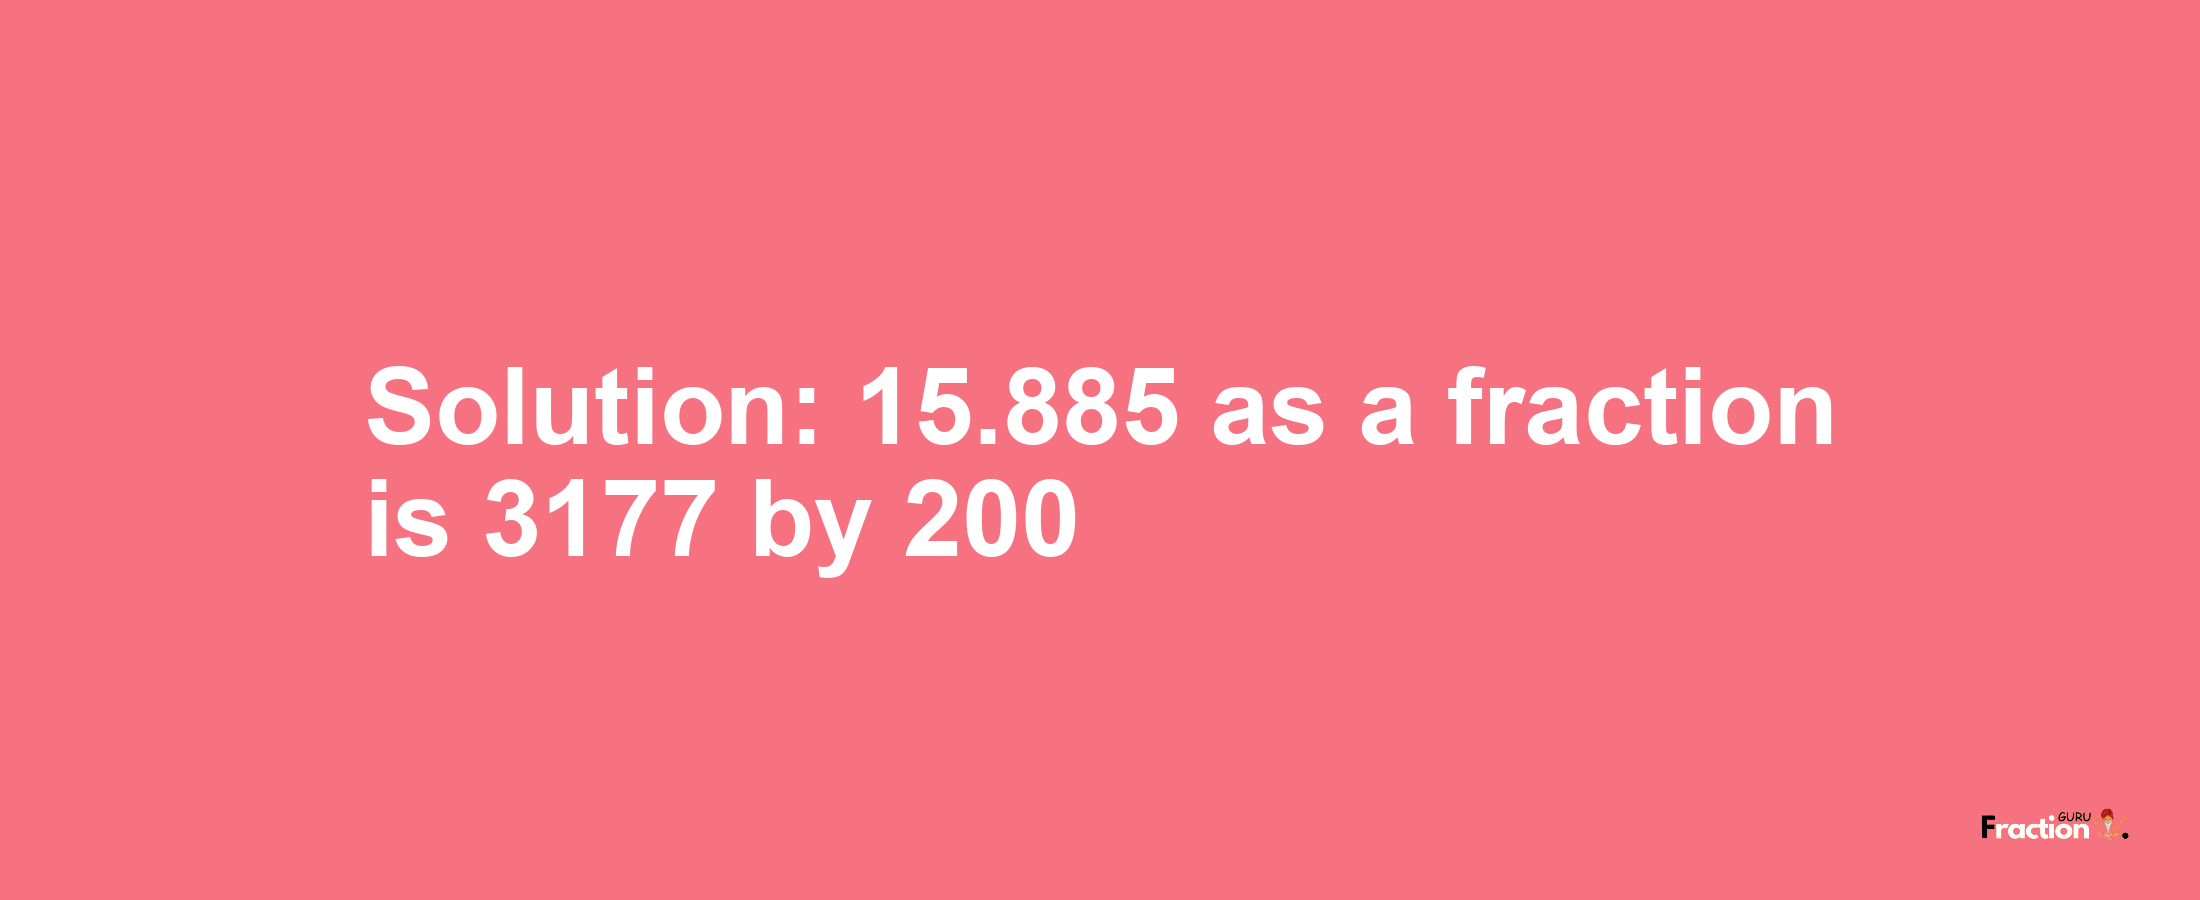 Solution:15.885 as a fraction is 3177/200